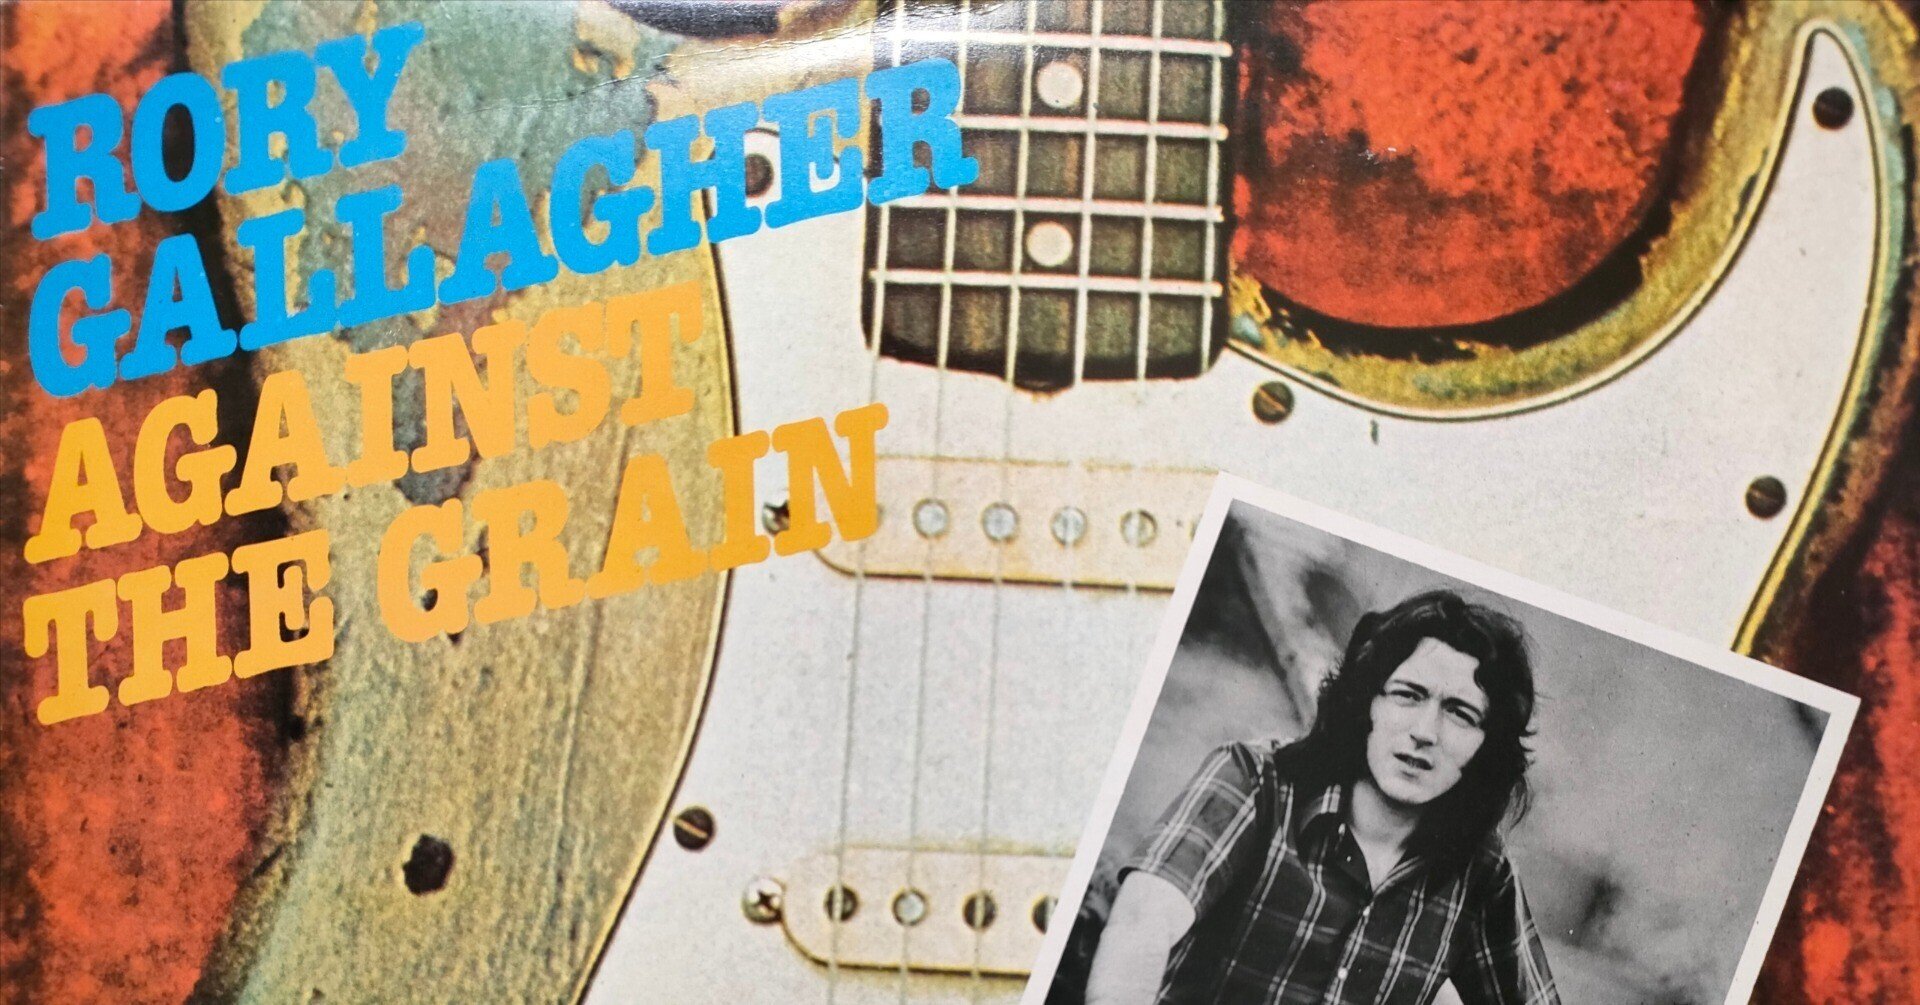 Against the Grain】(1975) Rory Gallagher ロリーのハードロック倍増計画！｜よっしー